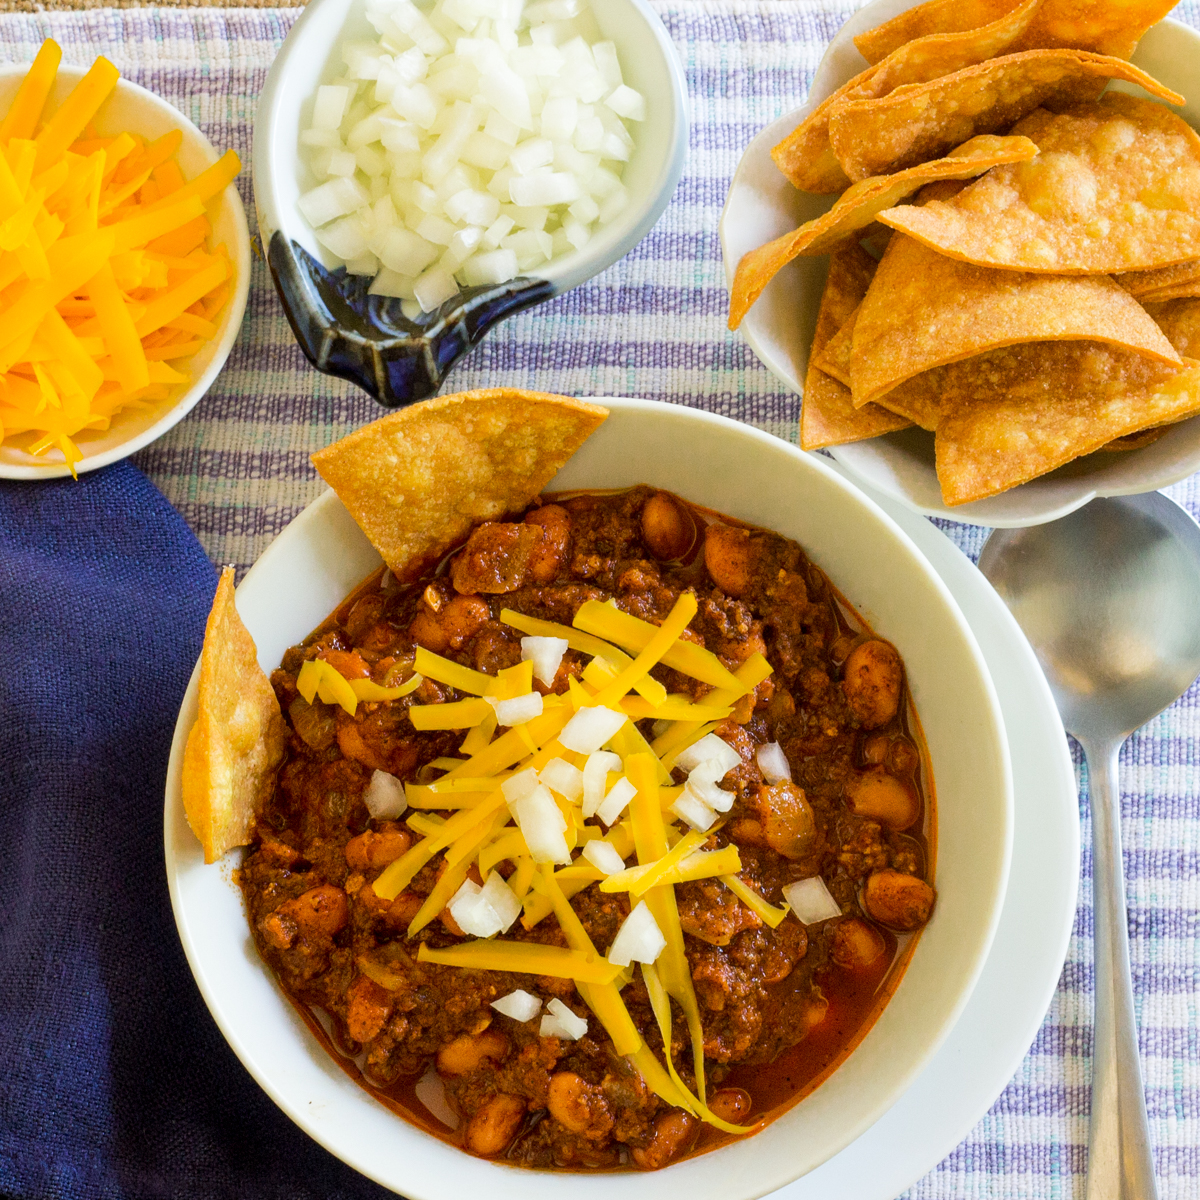 Bowl of vegetarian chili with onions, cheese and homemade corn chips